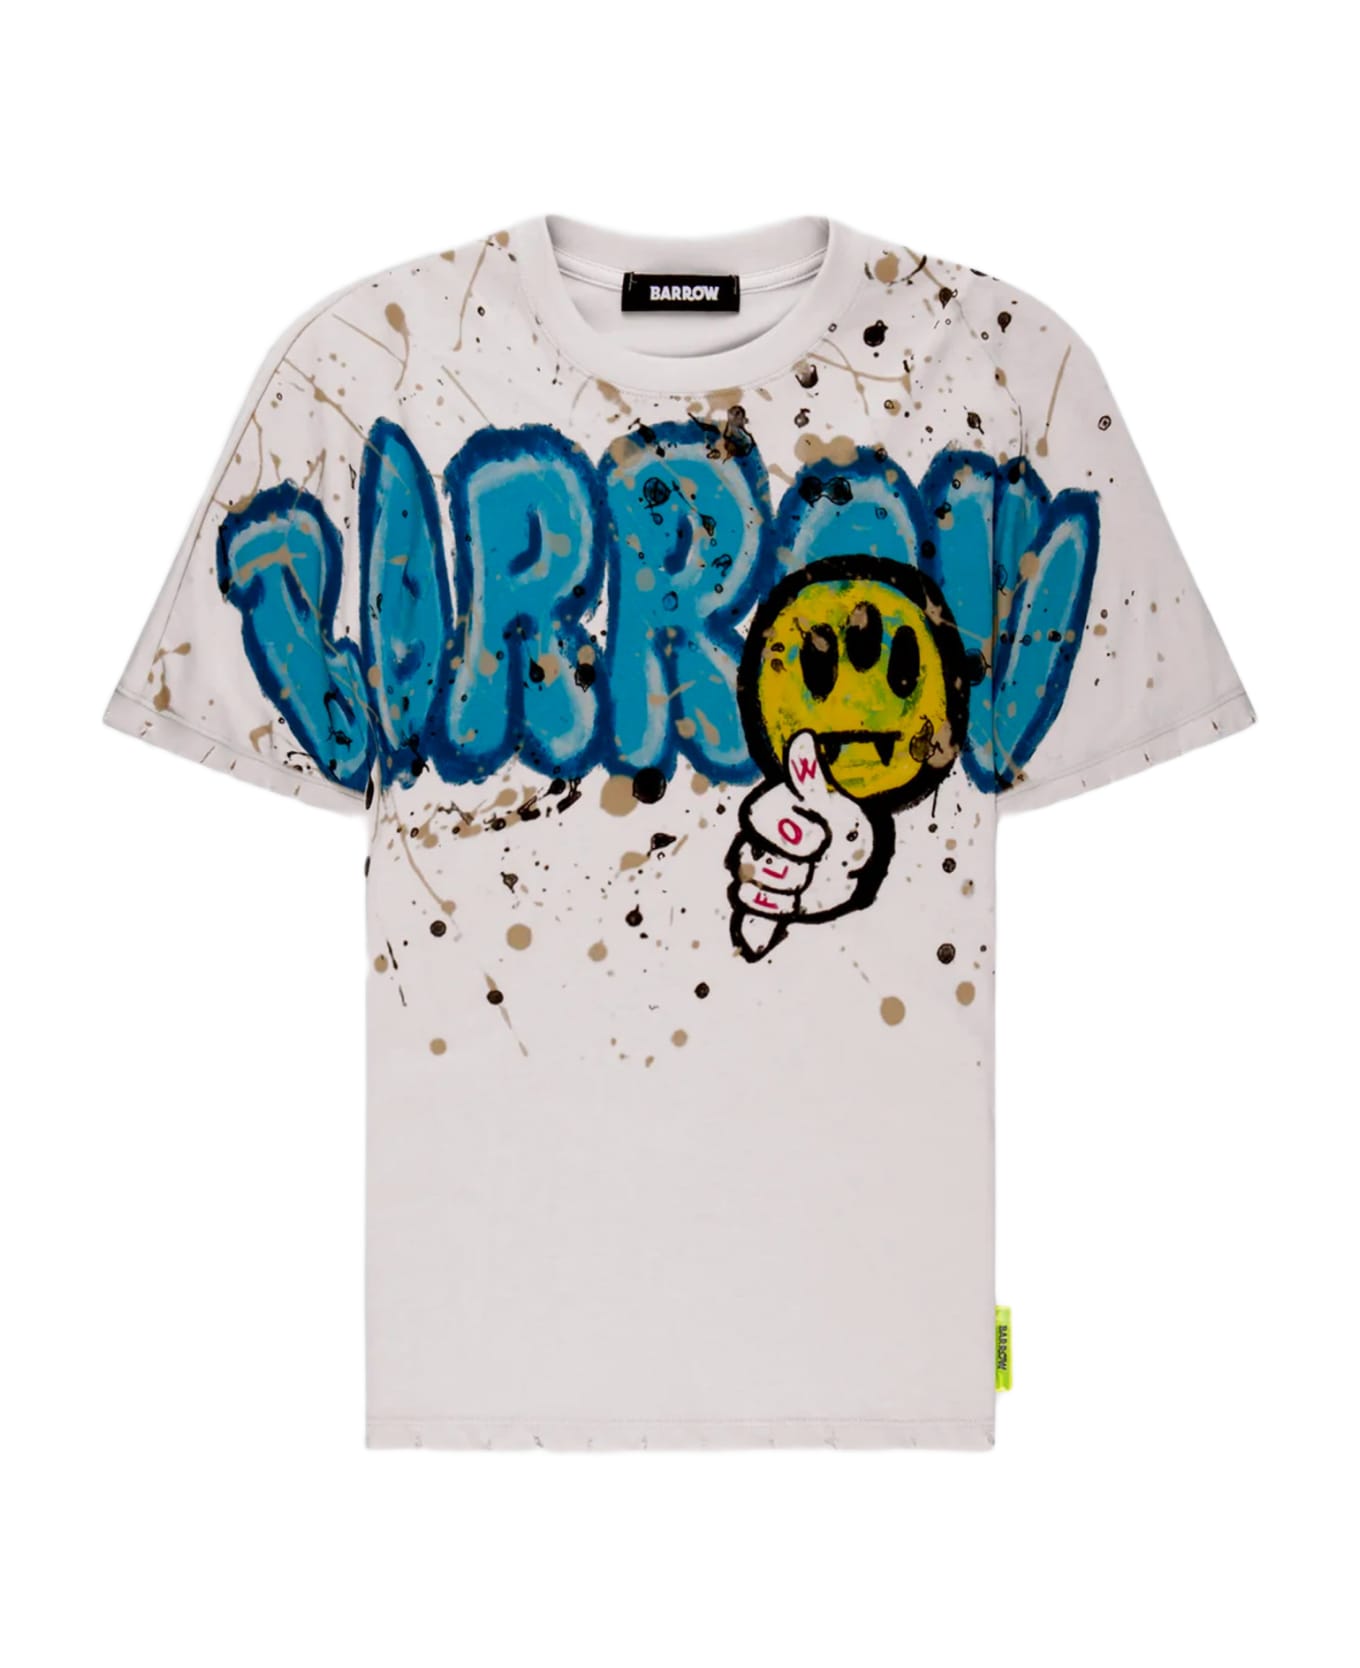 Barrow Jersey T-shirt Unisex Off White Cotton T-shirt With Graffiti Logo And Smile Print - NEUTRALS